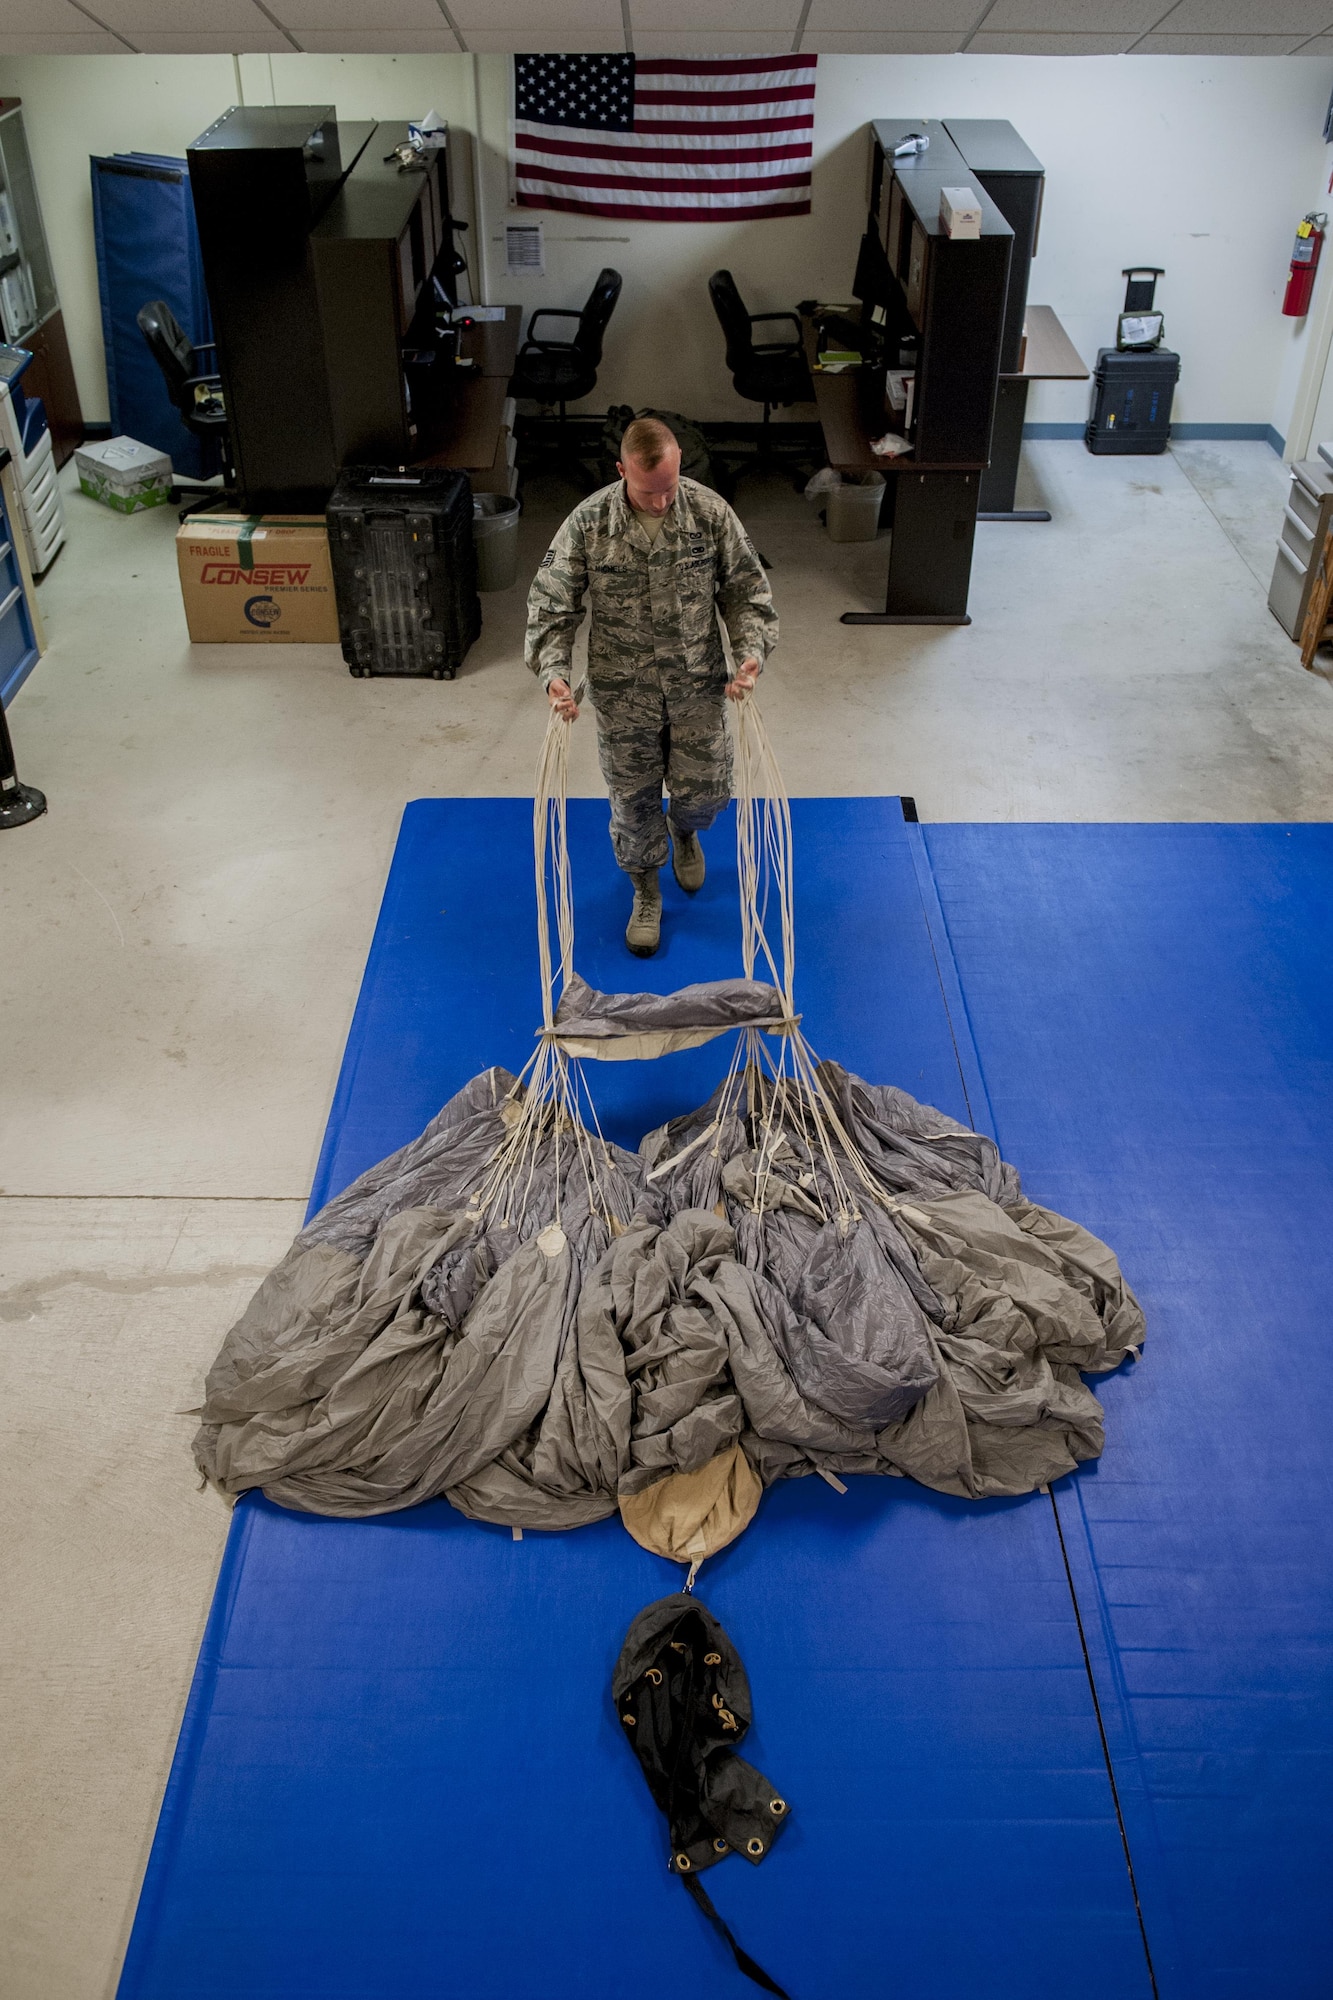 U.S. Air Force Tech. Sgt. Matthew Michels, 31st Rescue Squadron aircrew flight equipment assistant NCO in charge, straightens parachute chords while parachute packing June 20, 2016, at Kadena Air Base, Japan. Michels ensures 31st RQS pararescuemen can don safe parachute packs that have passed intensive safety checks. (U.S. Air Force photo by Senior Airman Peter Reft)